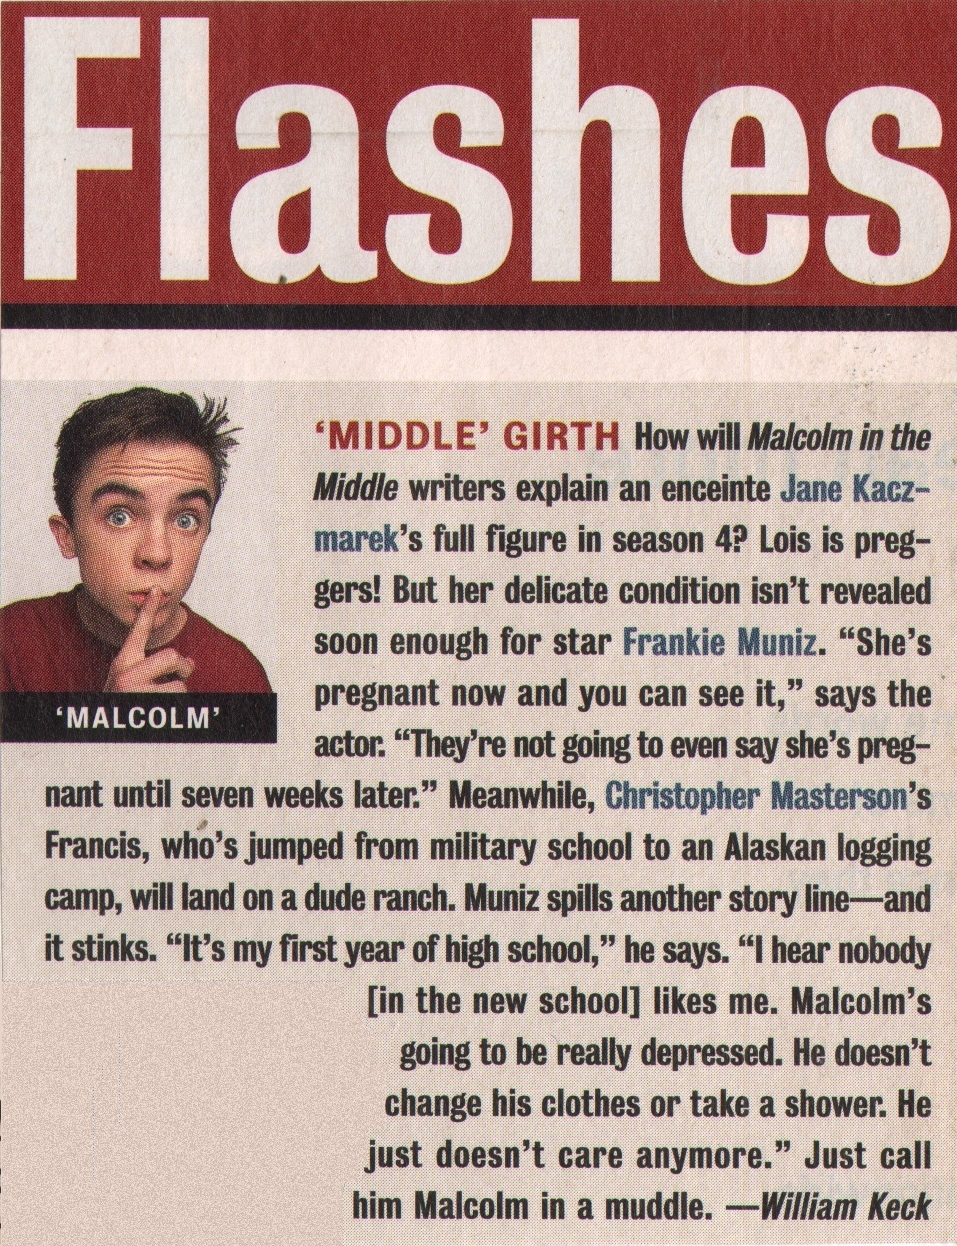 &quot;Entertainment Weekly&quot; magazine, August 23, 2002